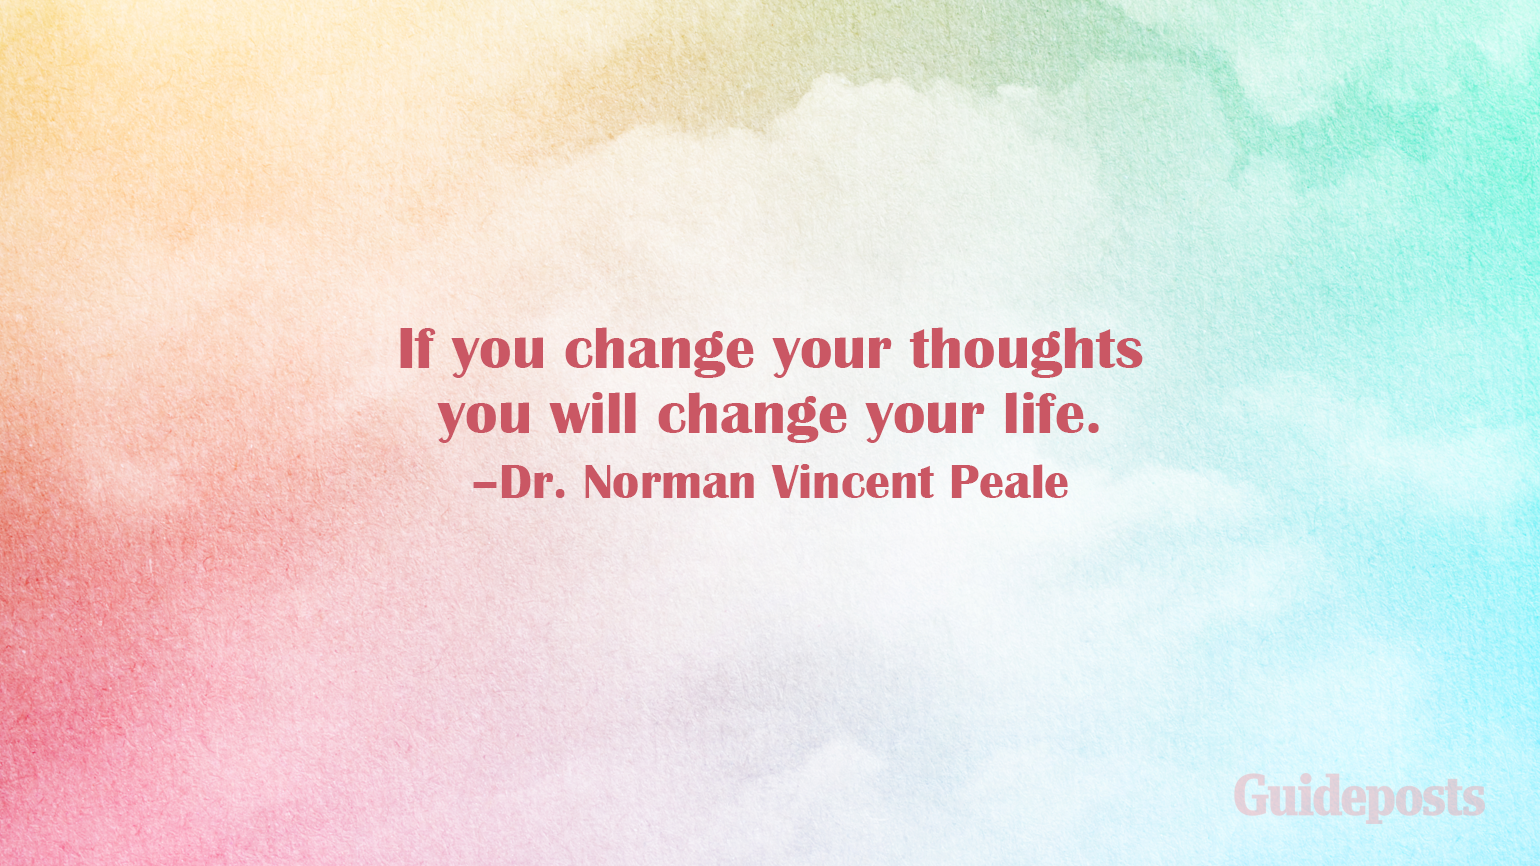 If you change your thoughts you will change your life. –Dr. Norman Vincent Peale